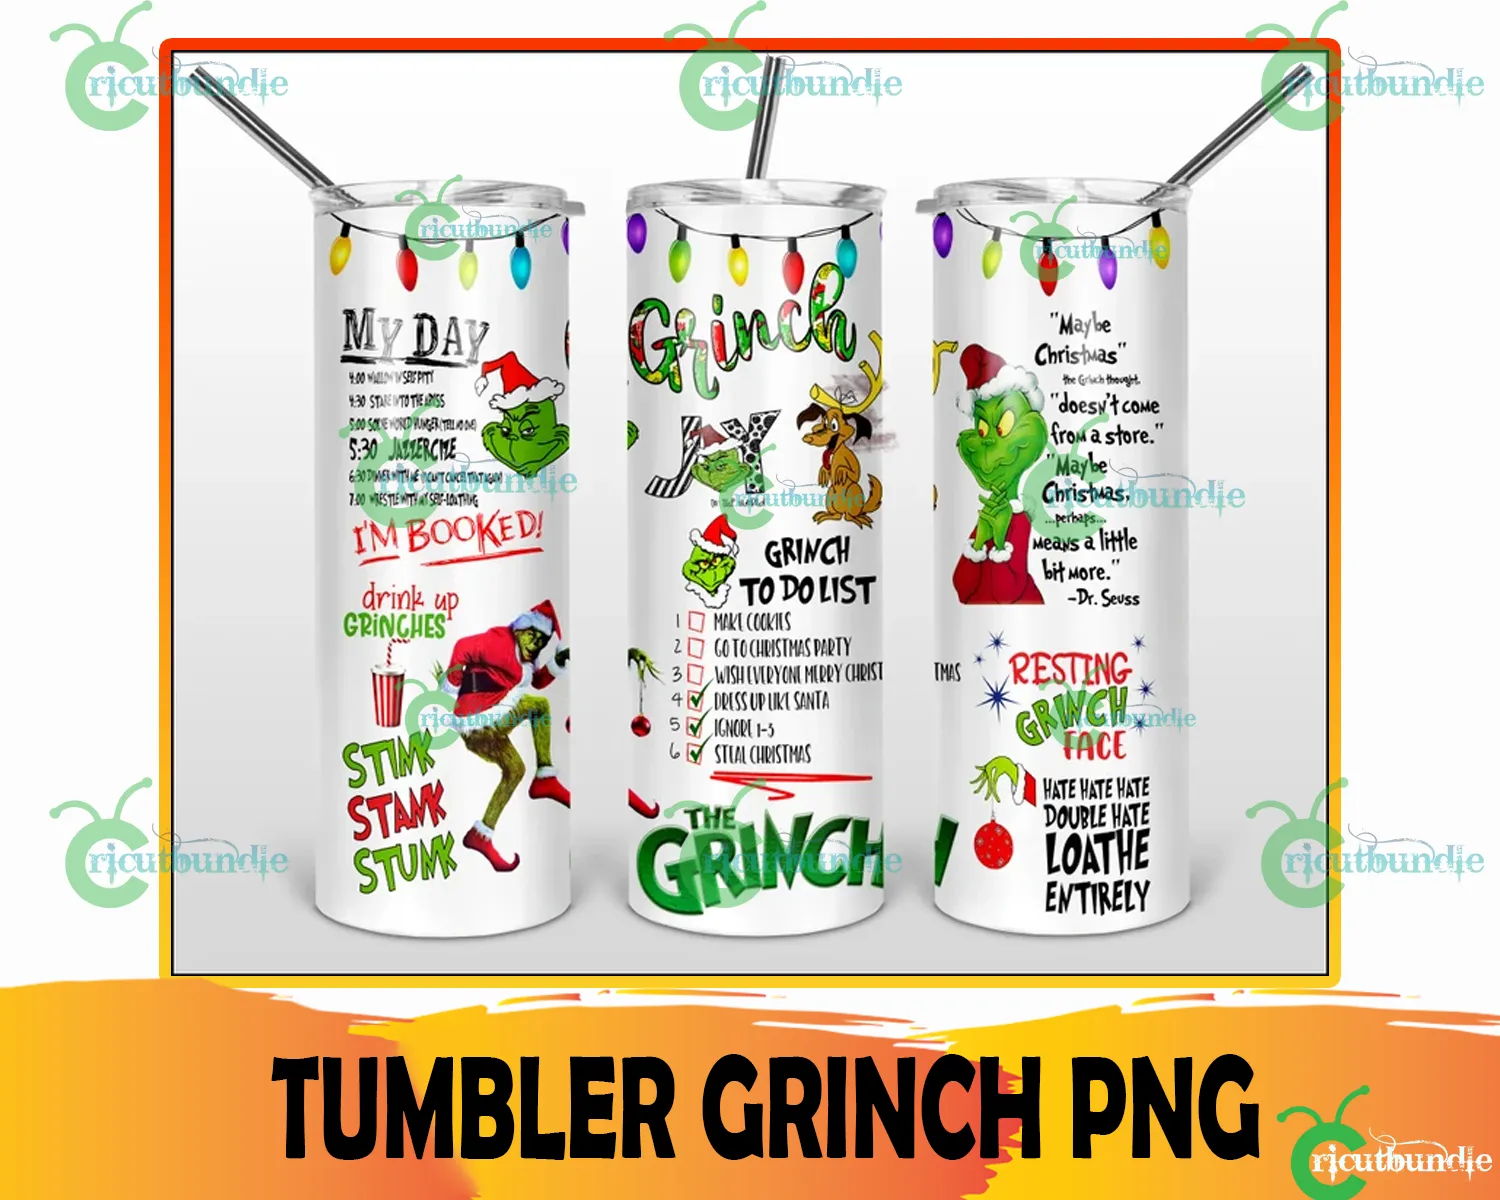 Drink Up Grinches - Grinch Water Bottle - Fun Cases